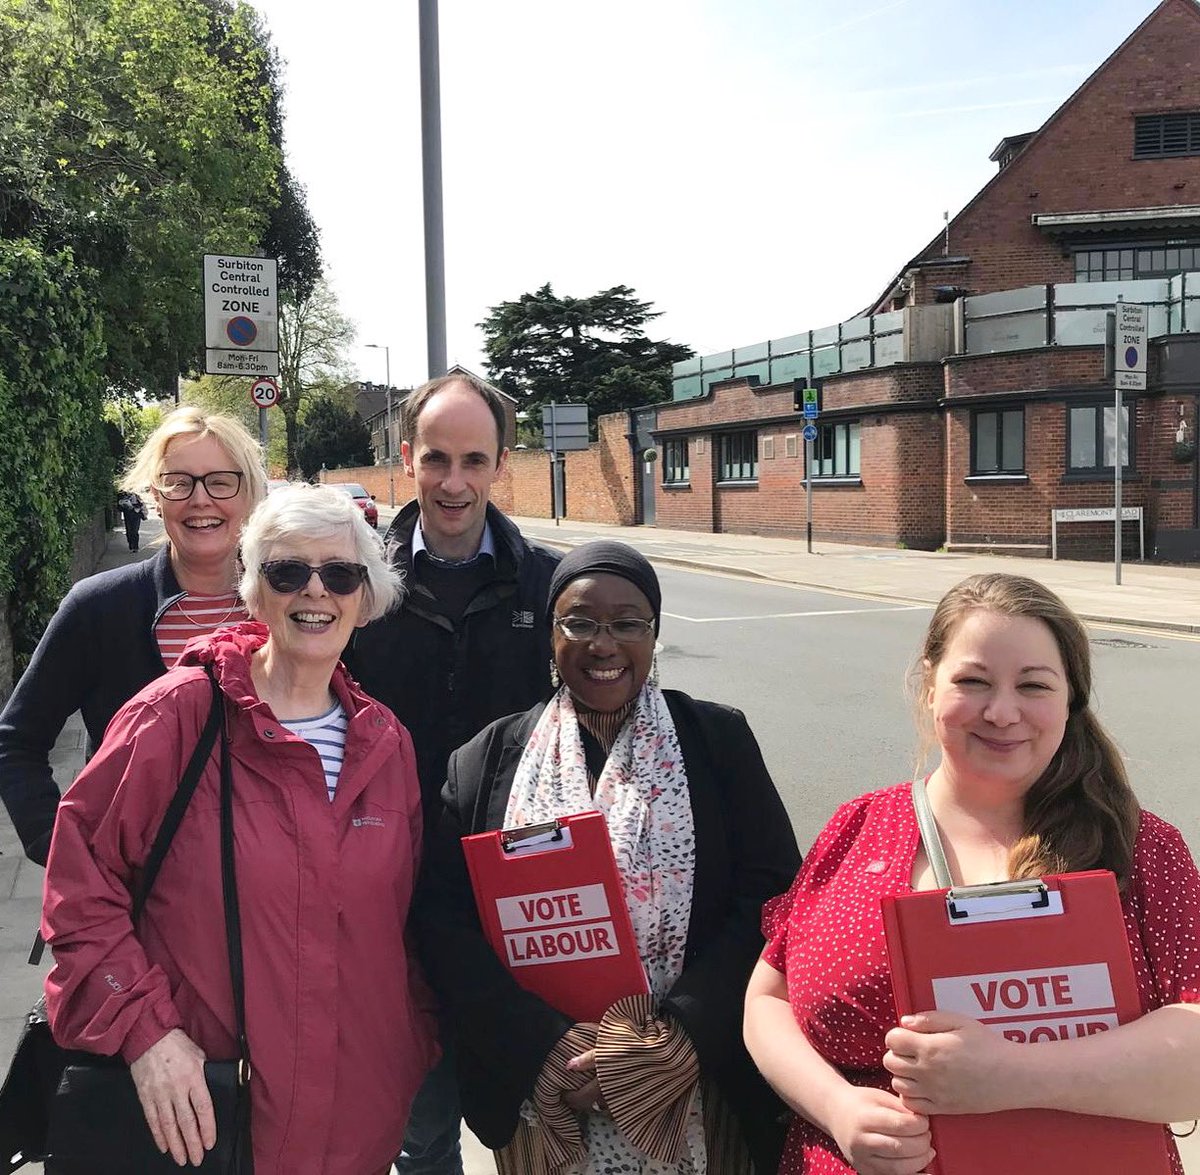 Kingston canvas for @SadiqKhan and our brilliant candidate for the South West @MarcelaBenede10. The Mayor is tackling the housing crisis, funding council home builds for Kingston, as well as providing over £140,000 in support for local young people. Labour delivers for London.